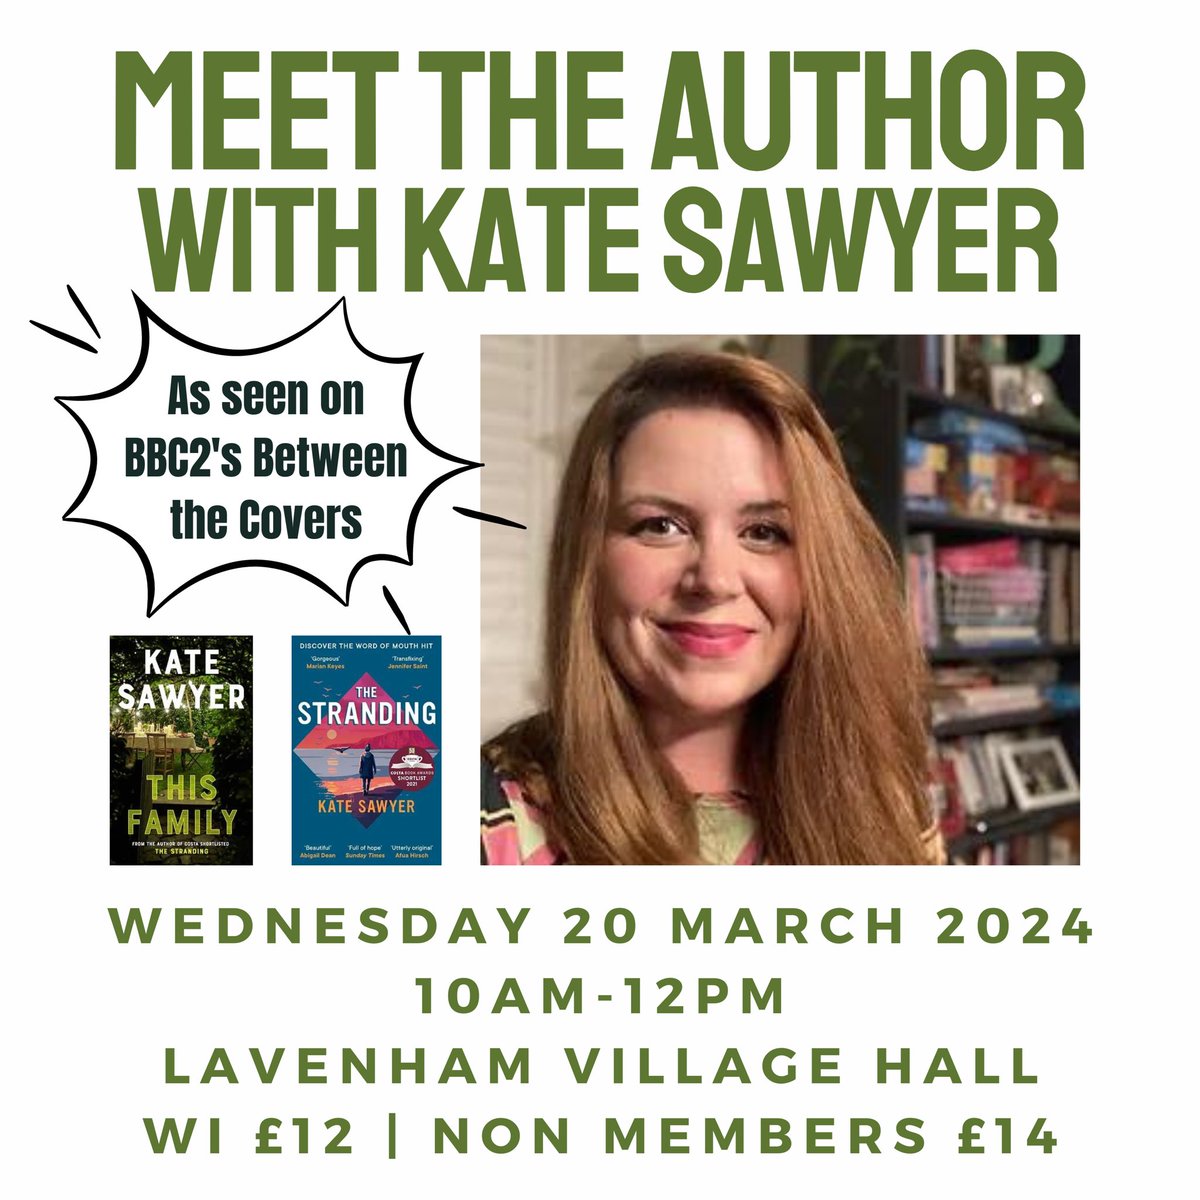 It's only a week until our audience with Bury St Edmunds author @KateSawyer 💚 Kate will be deep diving into her career and her writing, and signing copies of her books. Have you got your ticket? Email us to book or call 01284 336645 (Tue-Thurs from 10am) 💚